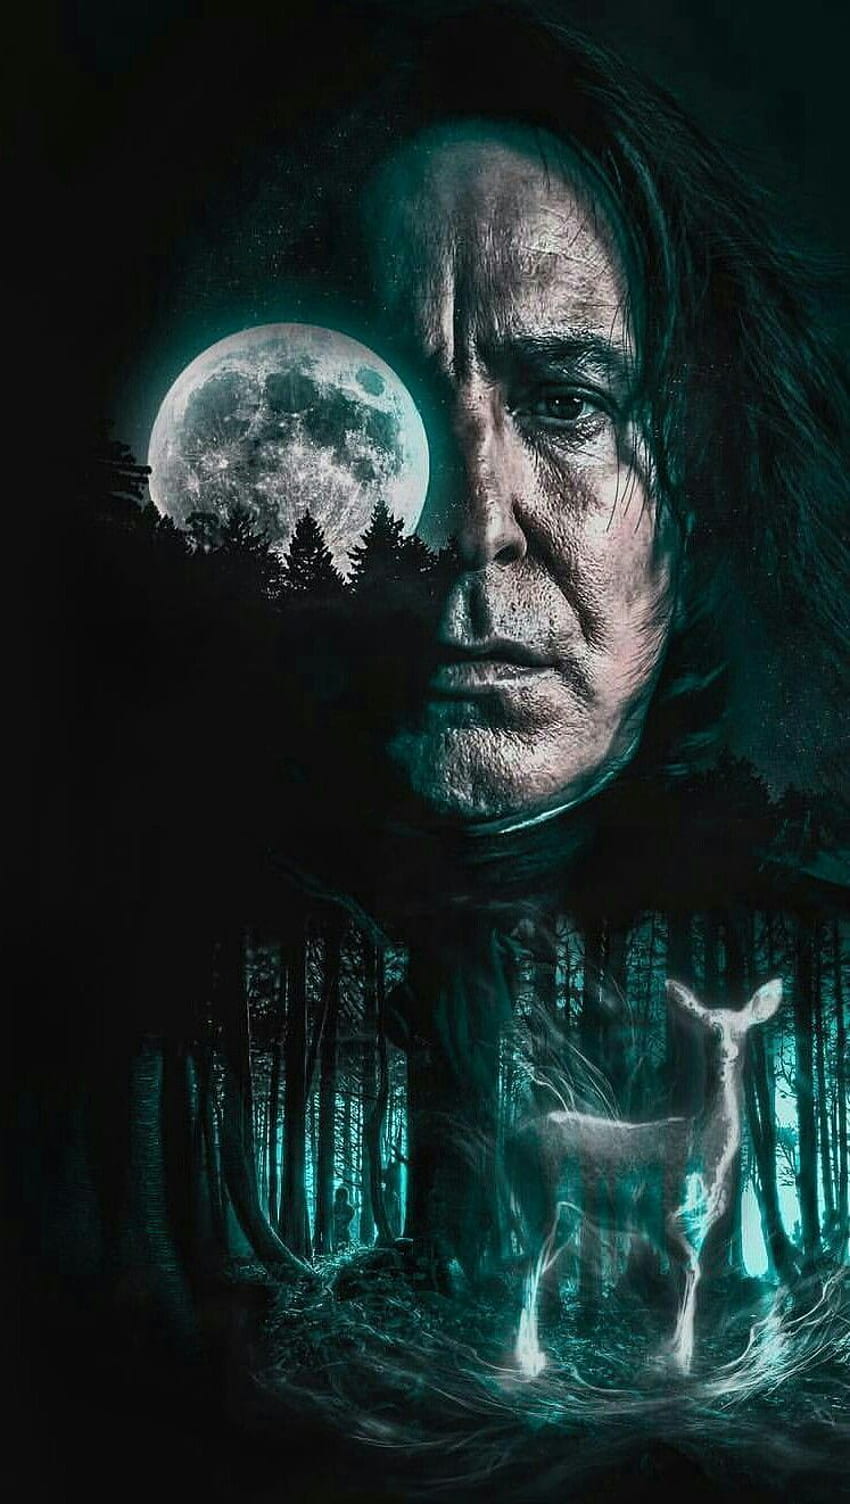 Download Severus Snape wallpapers for mobile phone free Severus Snape  HD pictures